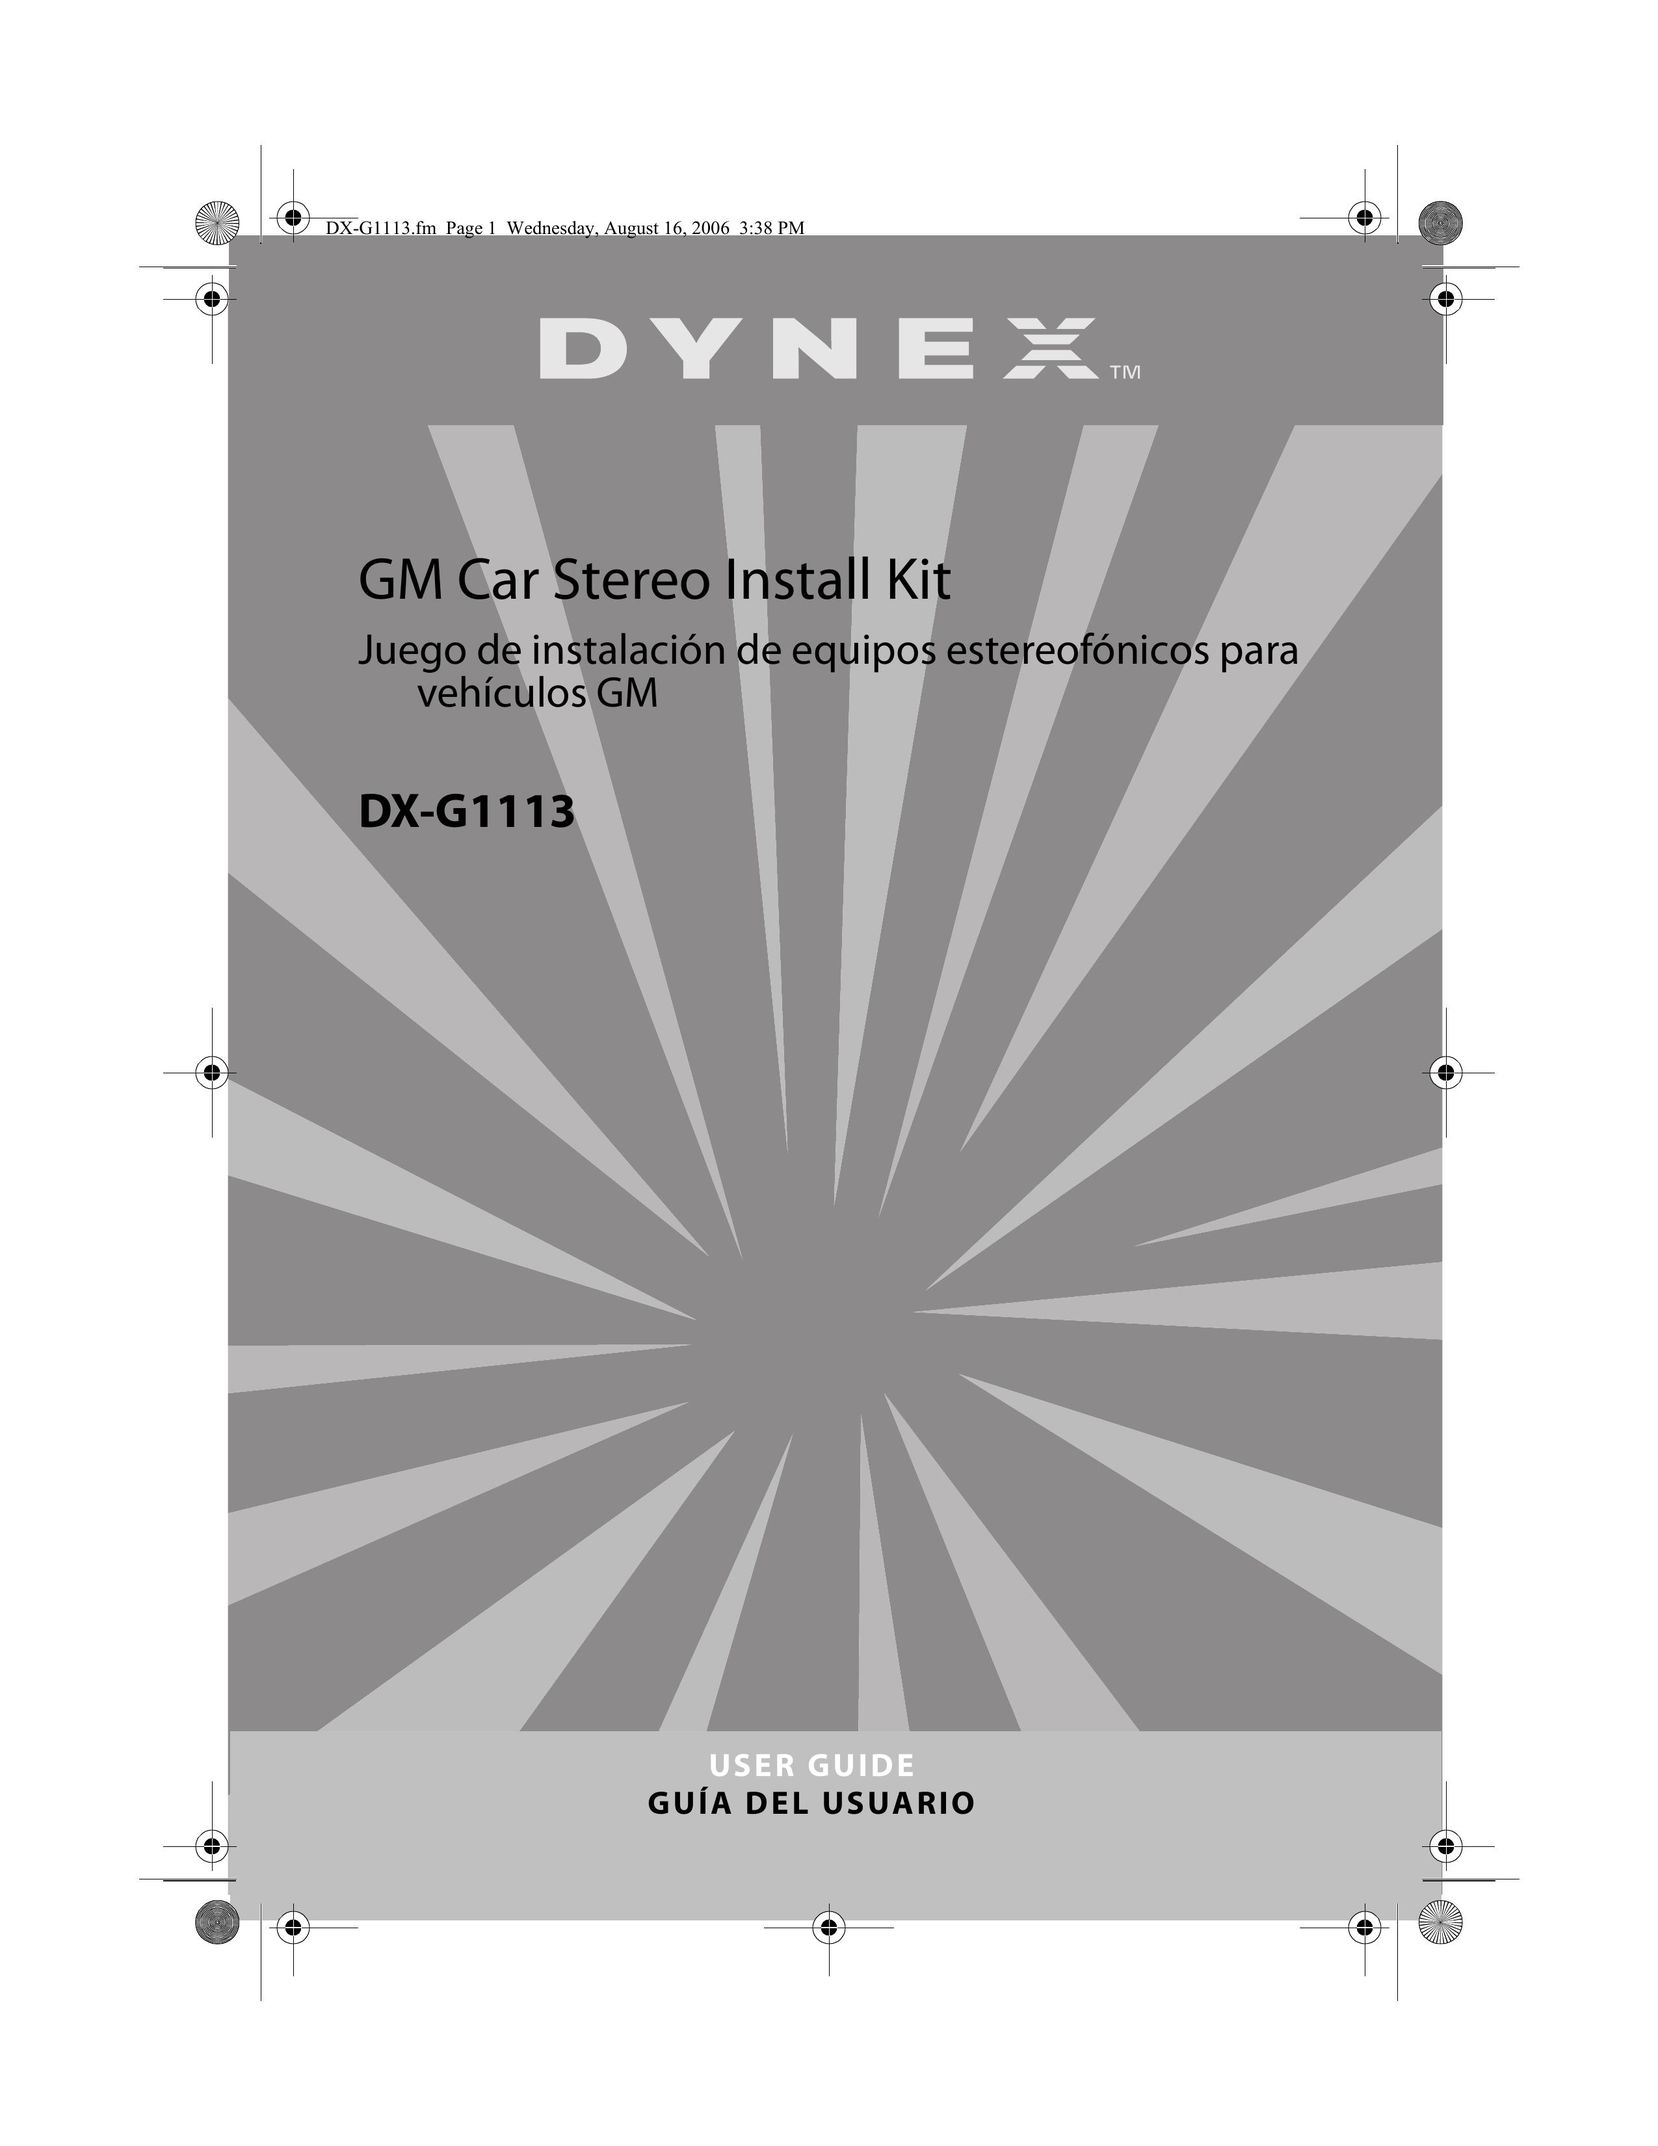 Dynex DX-G1113 Car Stereo System User Manual (Page 1)